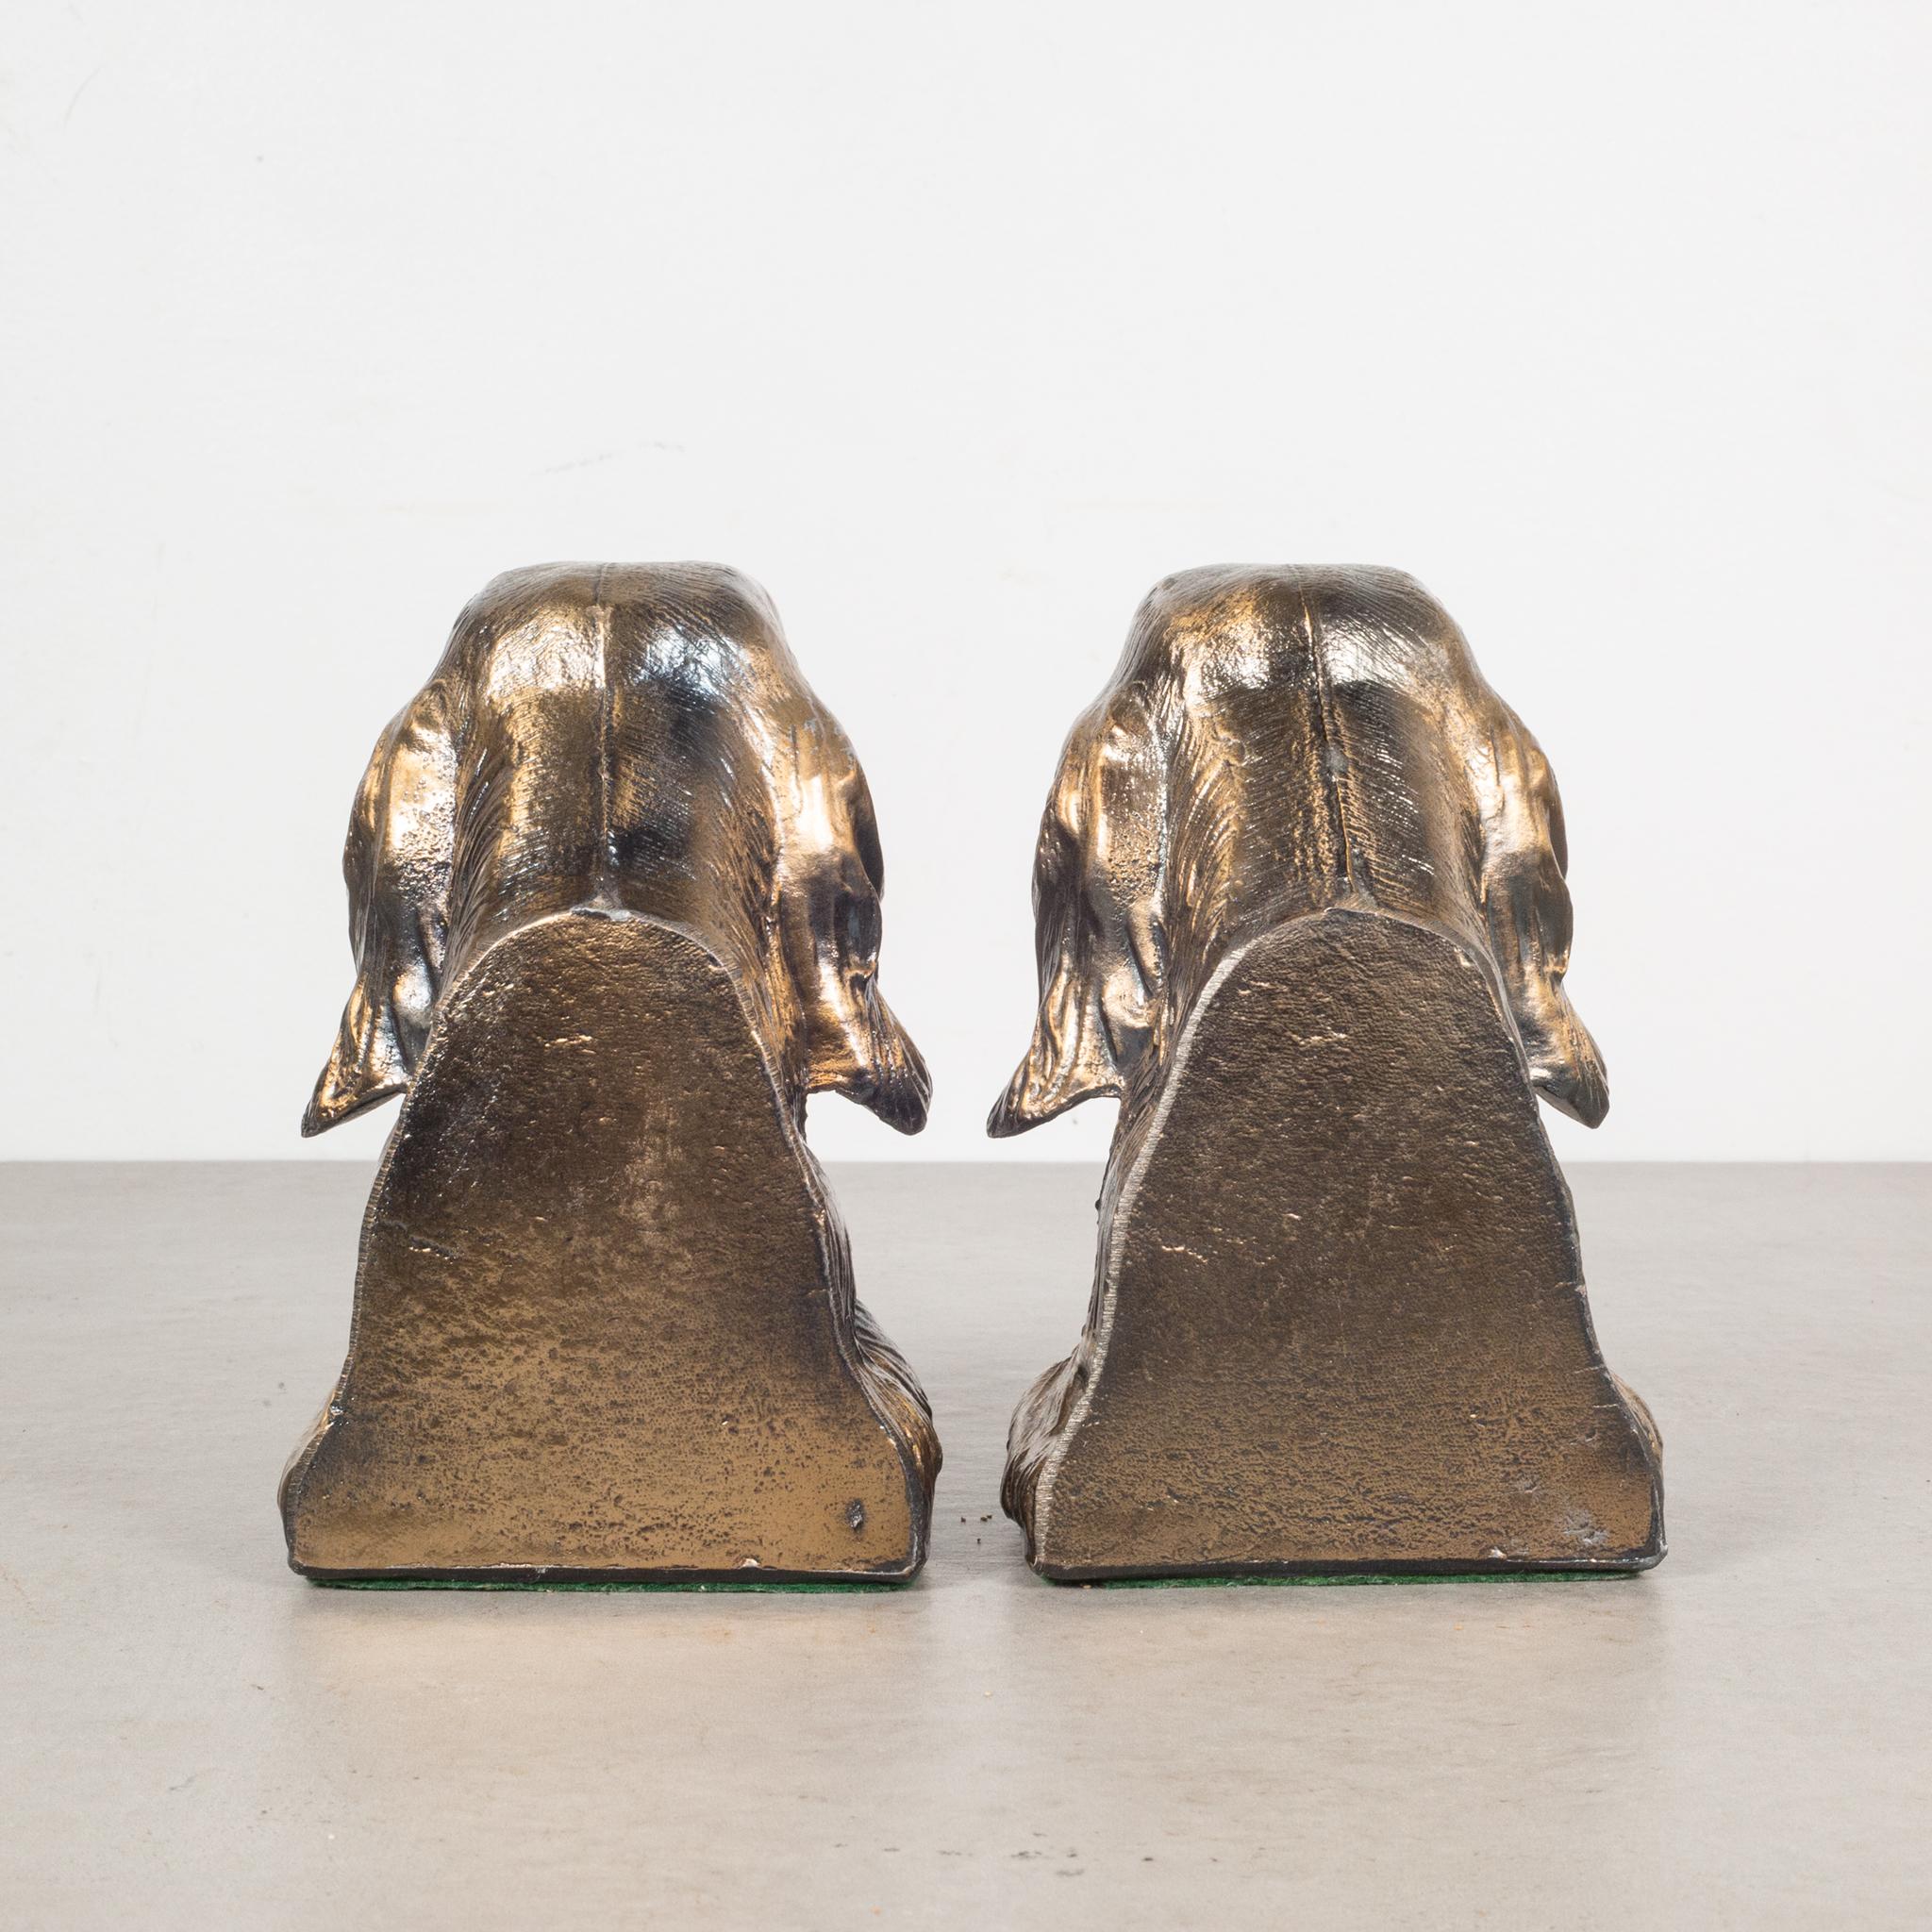 20th Century Bronze-Plated Dog Bookends, circa 1940